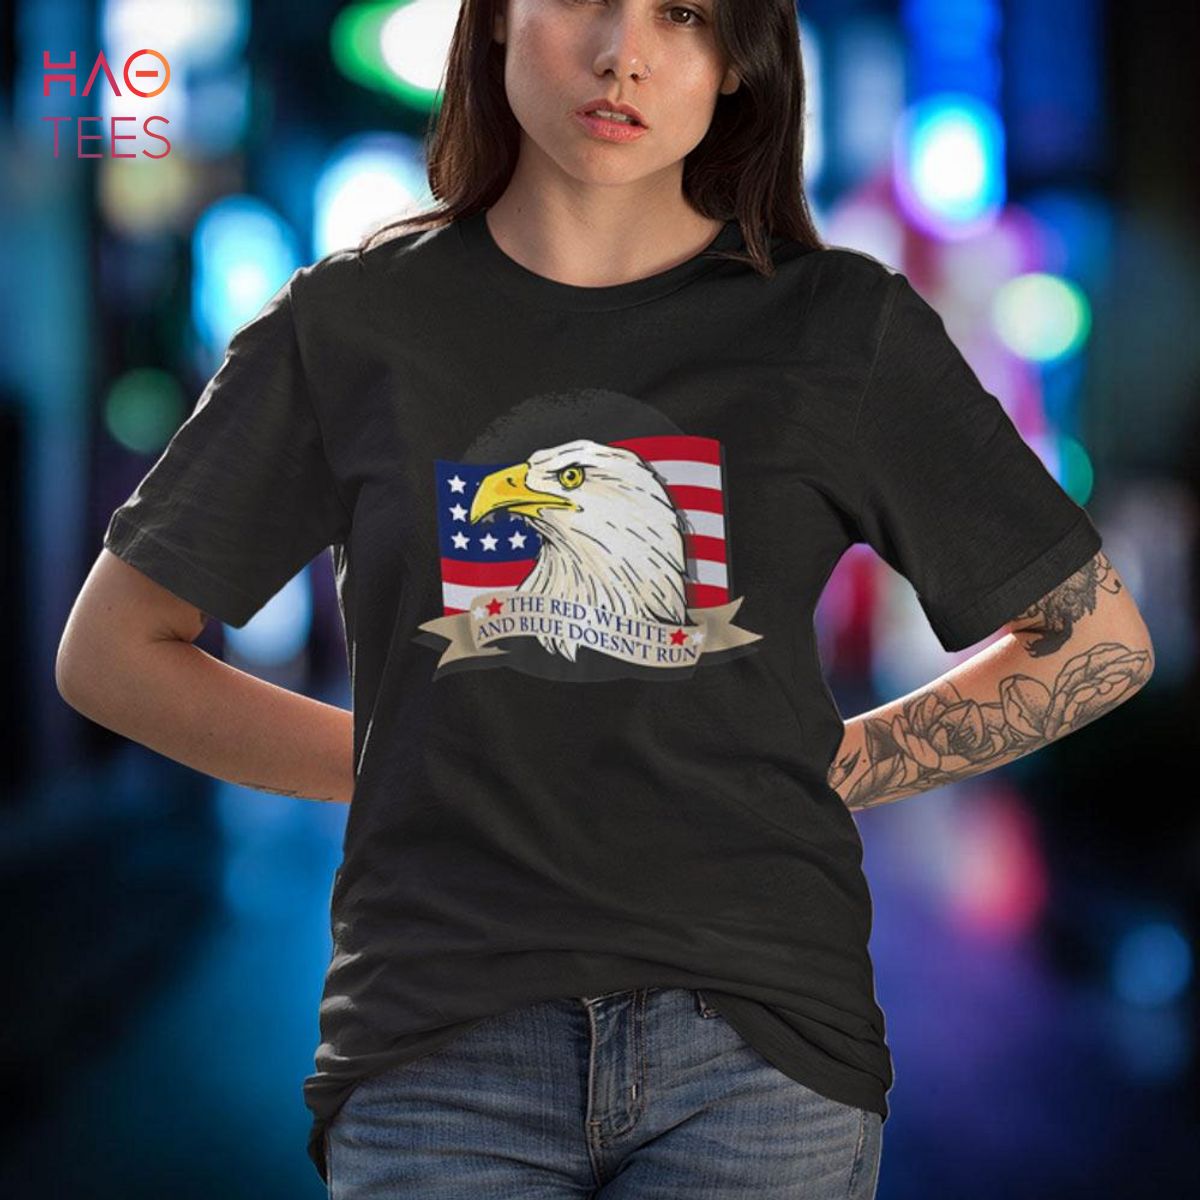 The Red White And Blue Doesn't Run Shirt